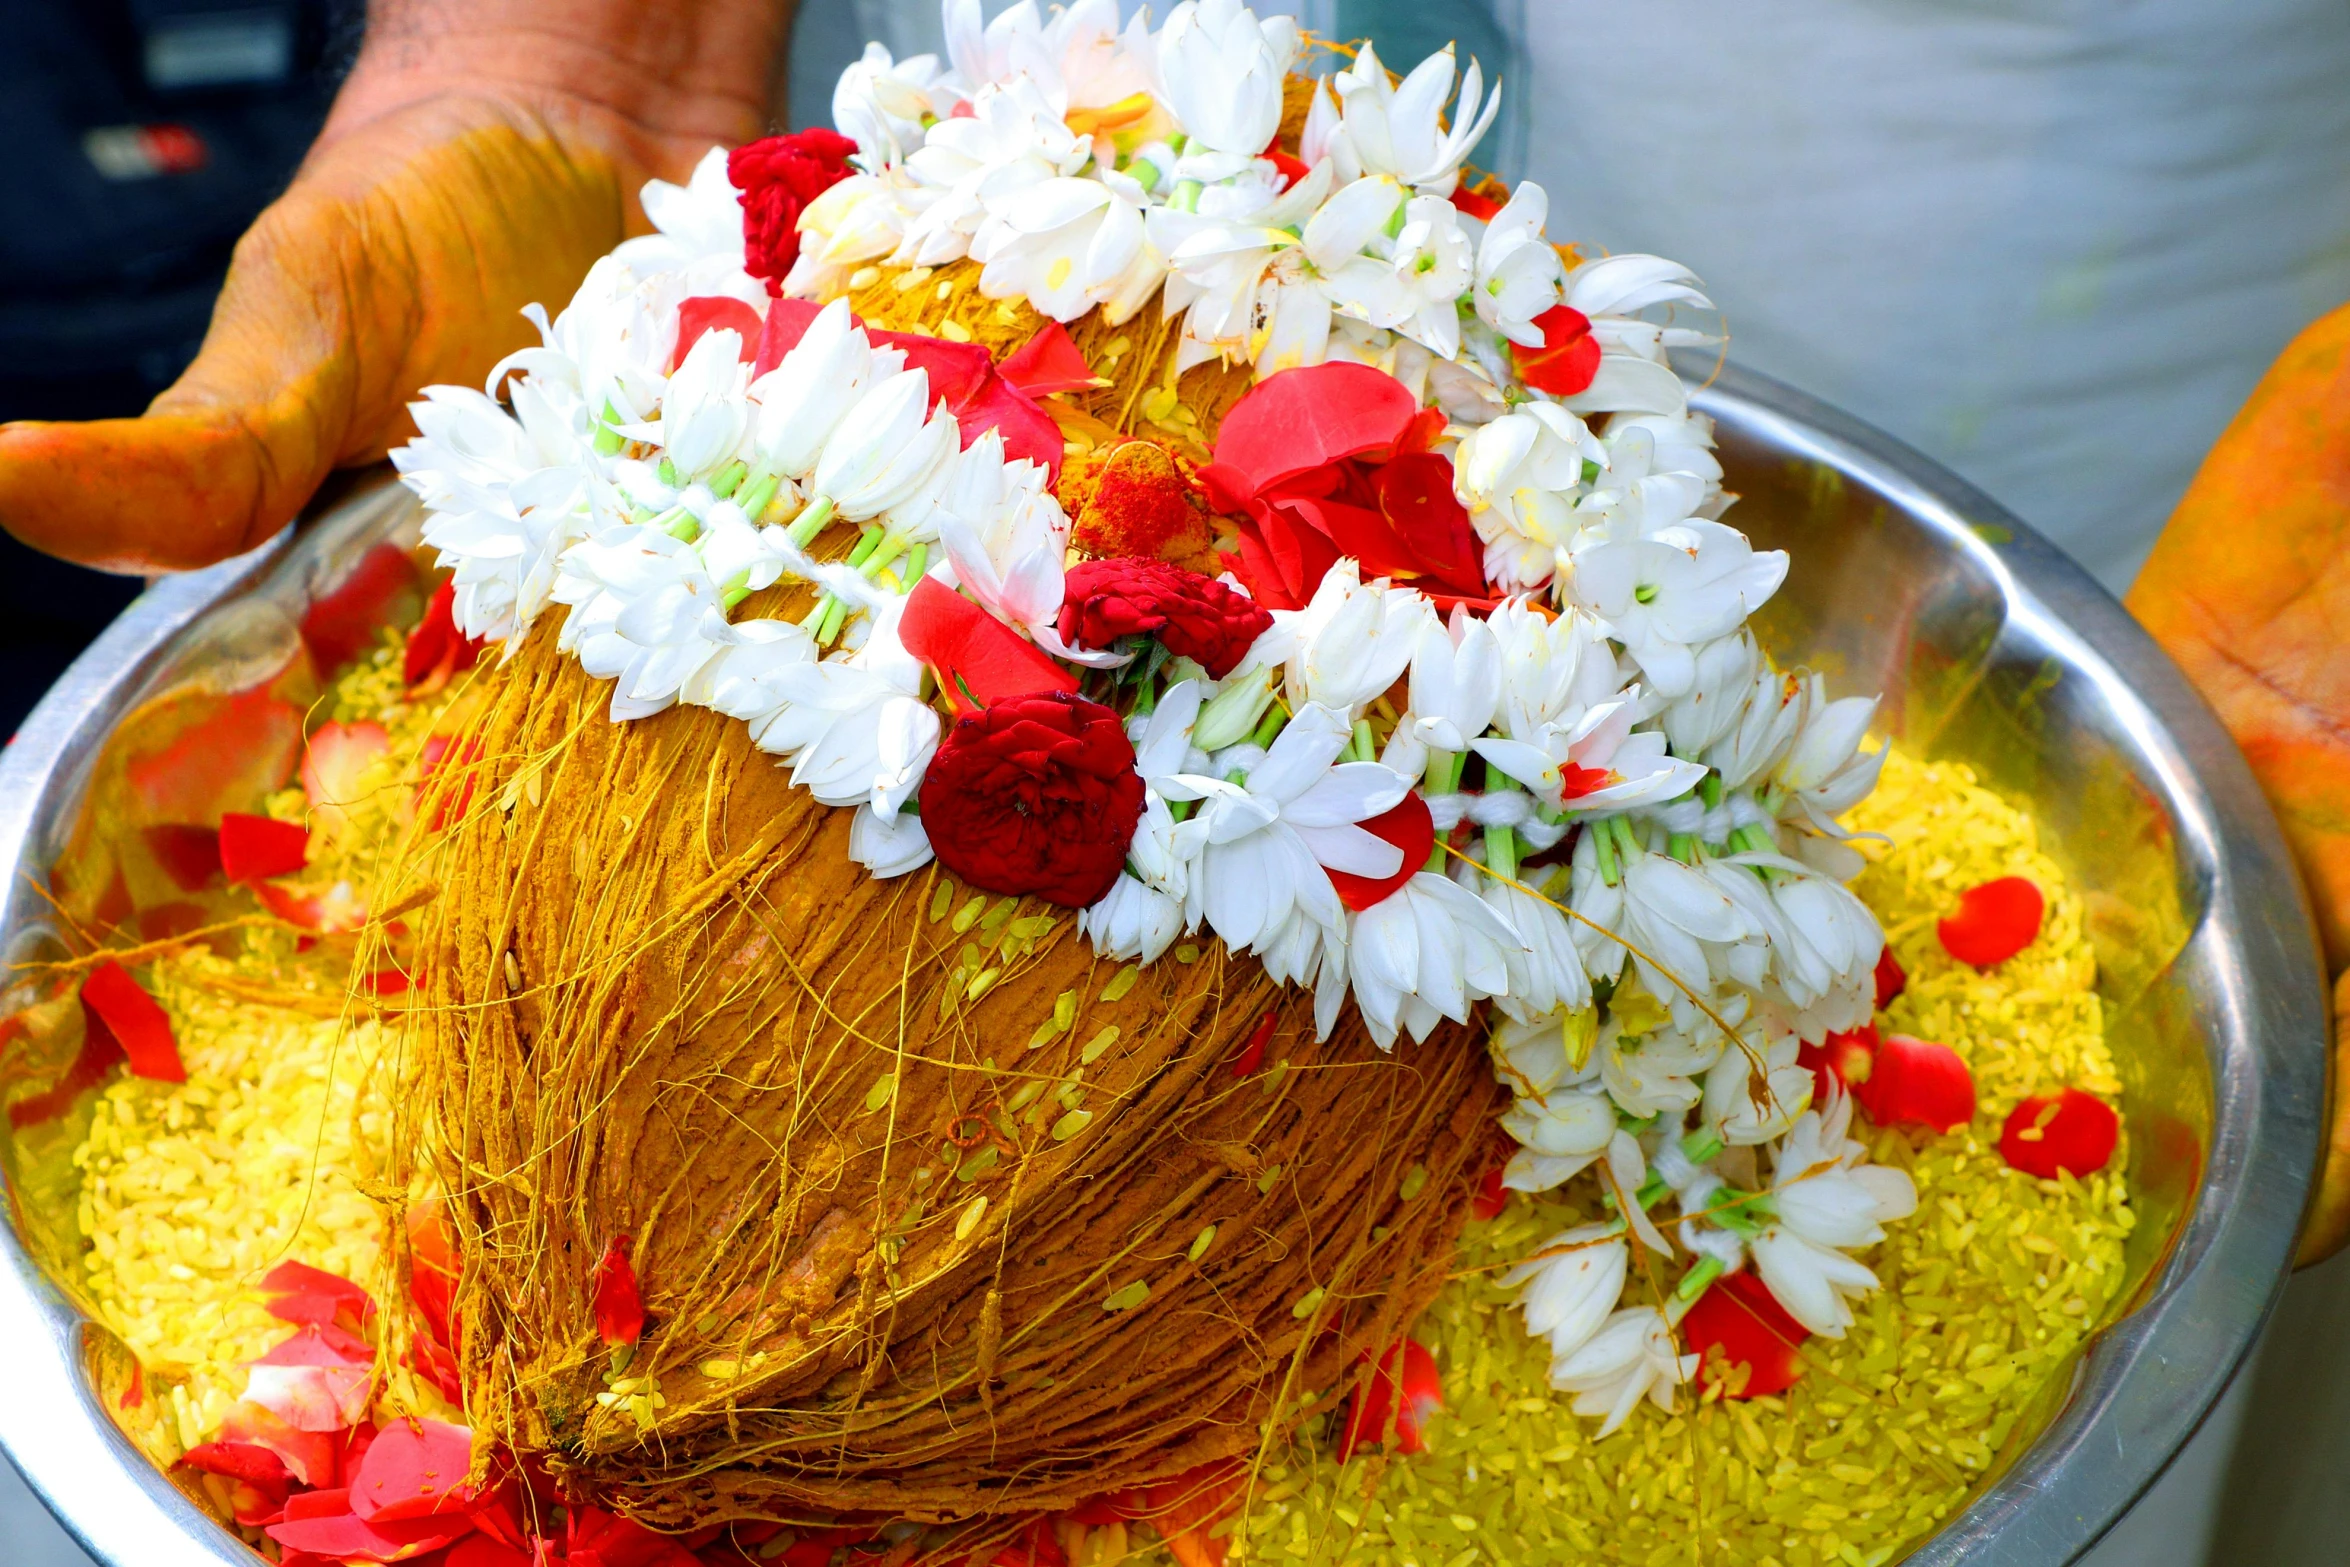 a close up of a person holding a bowl of food, hurufiyya, covered with flowers, in a temple, coconuts, profile image